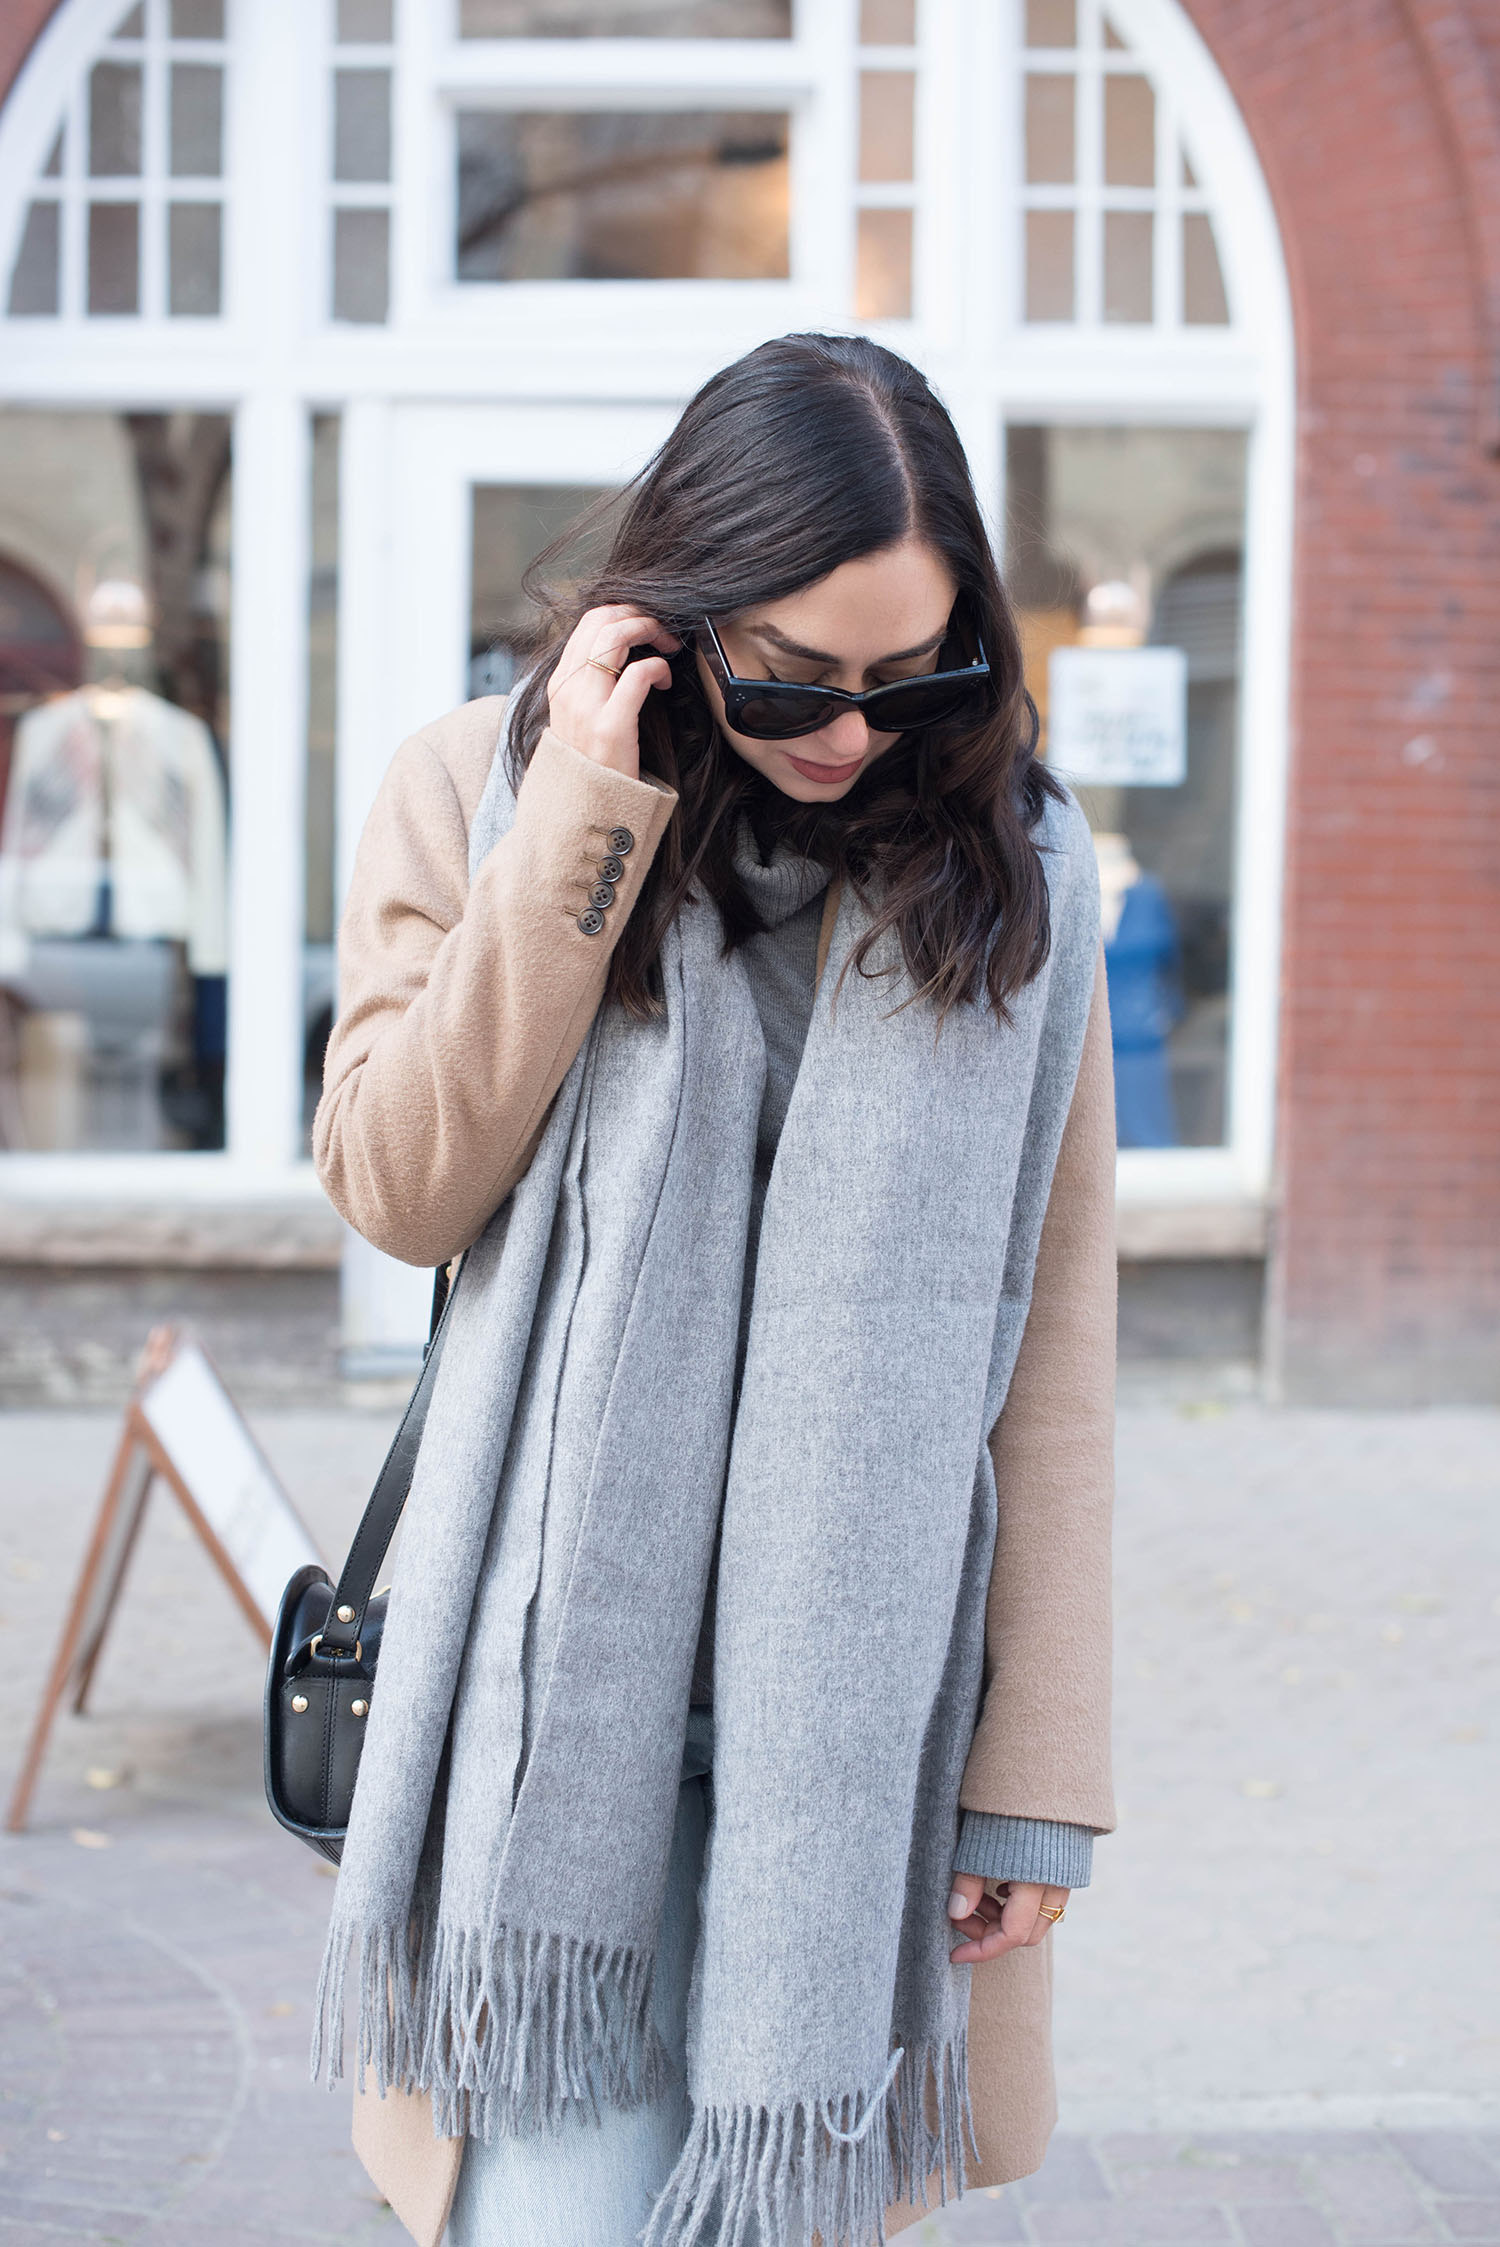 Portrait of fashion blogger Cee Fardoe of Coco & Vera wearing an ASOS wool scarf and Celine Audrey sunglasses